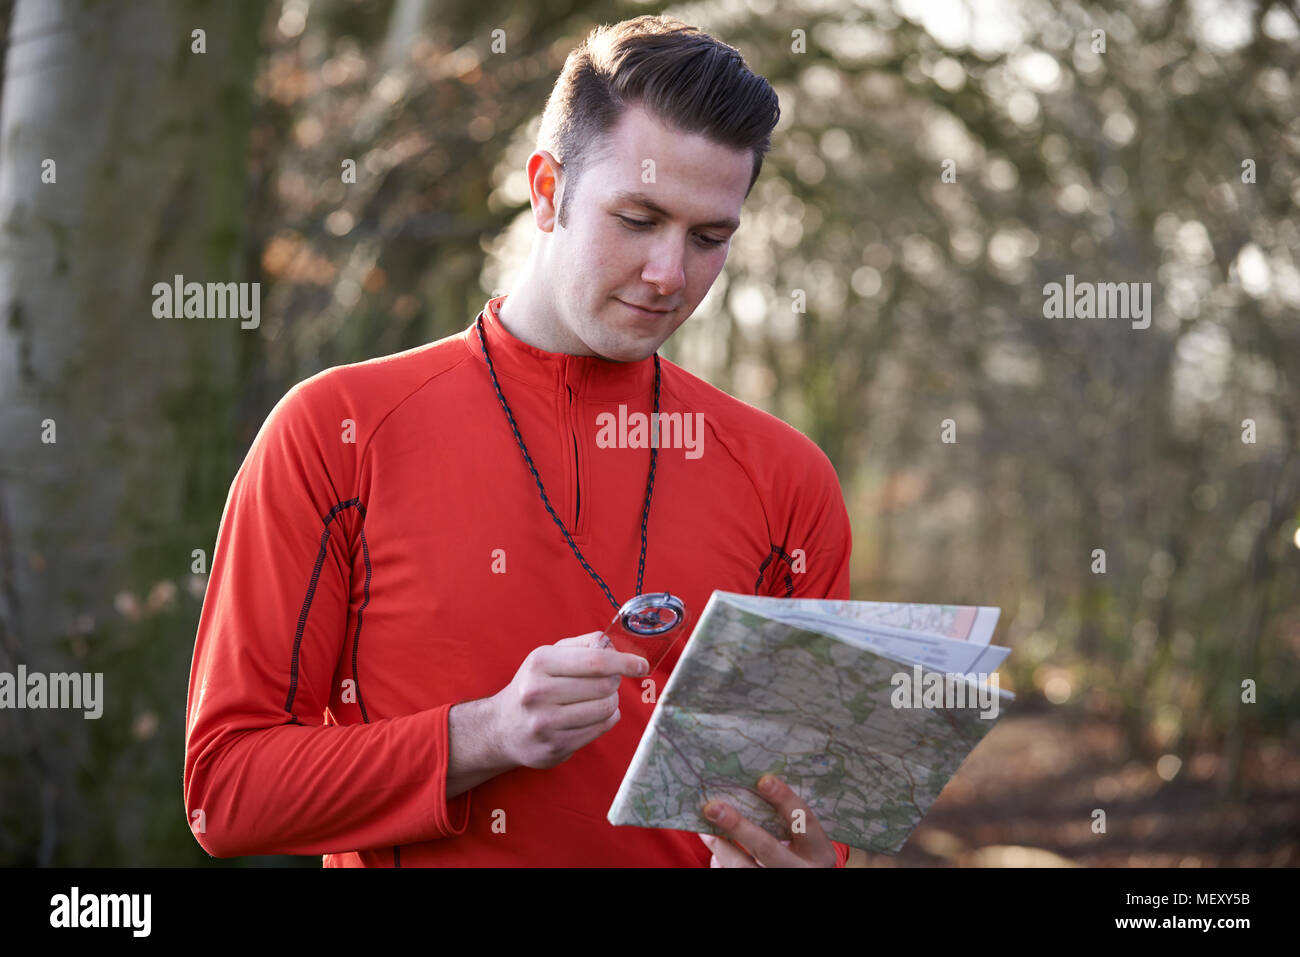 Man Orienteering In Woodlands With Map And Compass Stock Photo